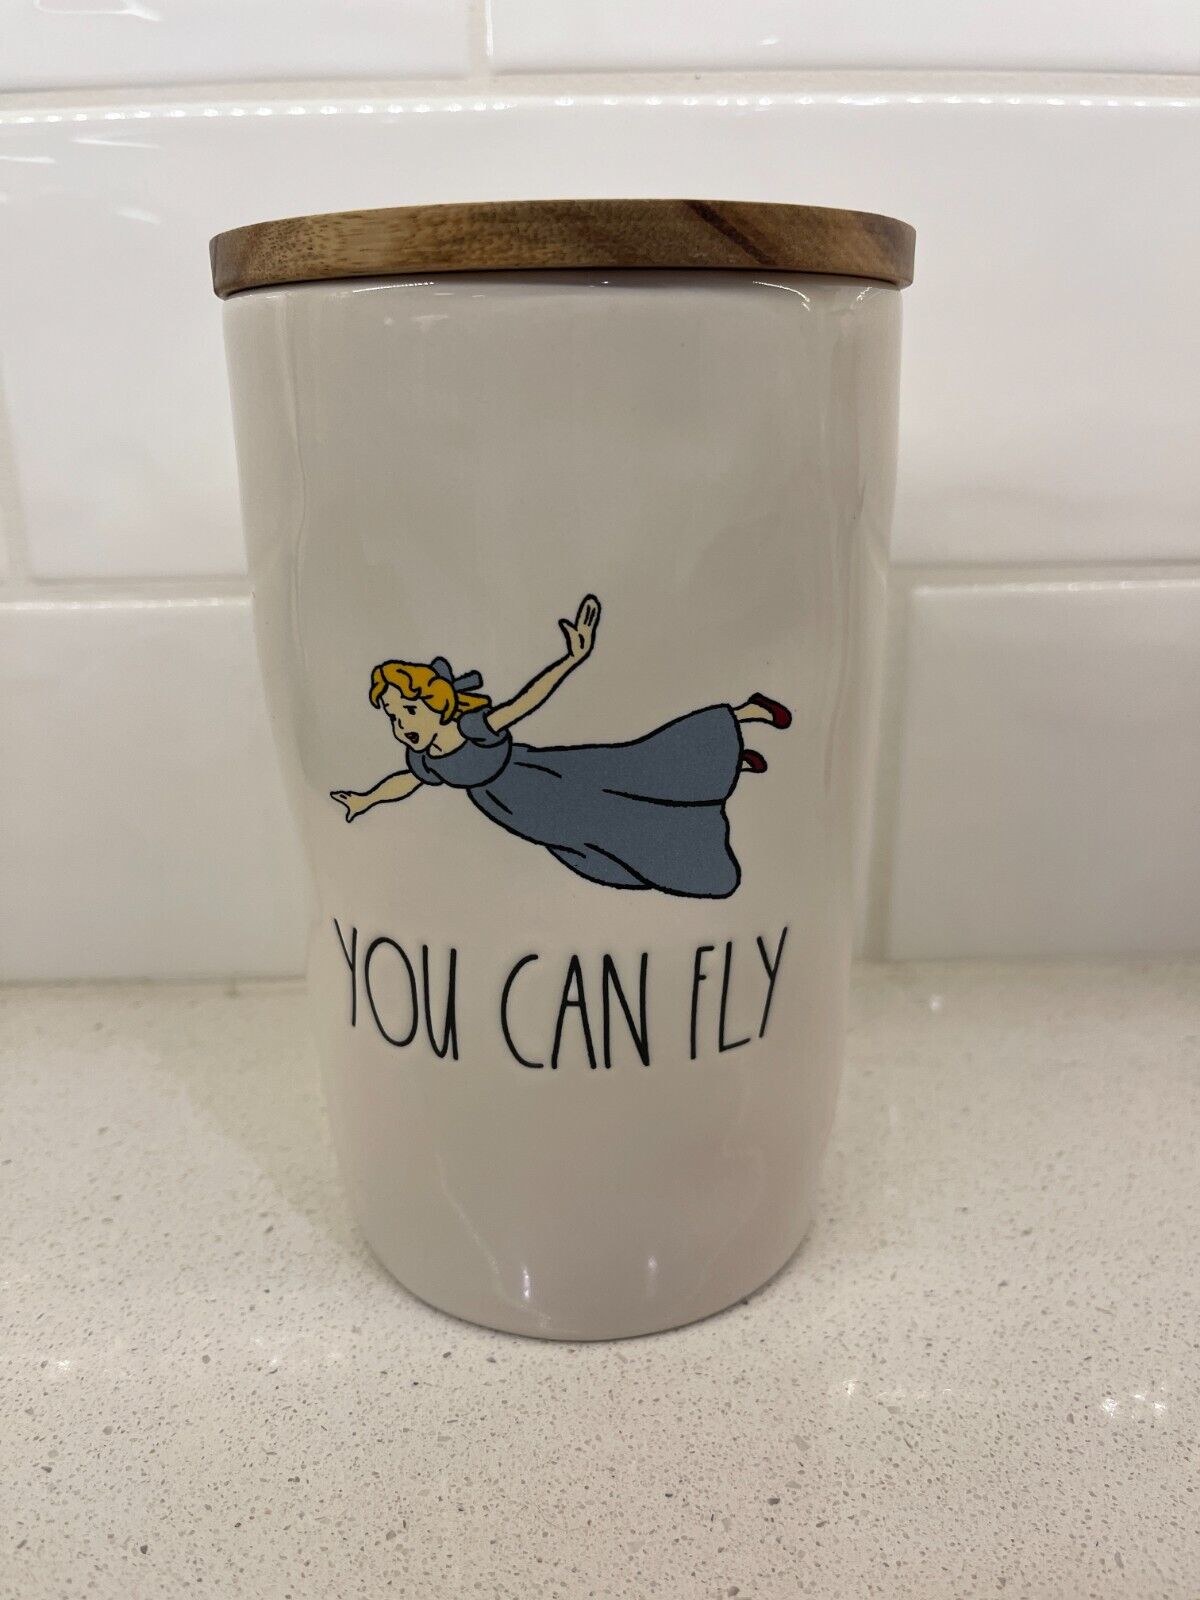 NEW Rae Dunn YOU CAN FLY Peter Pan Wendy Disney Cellar Canister Wooden Lid